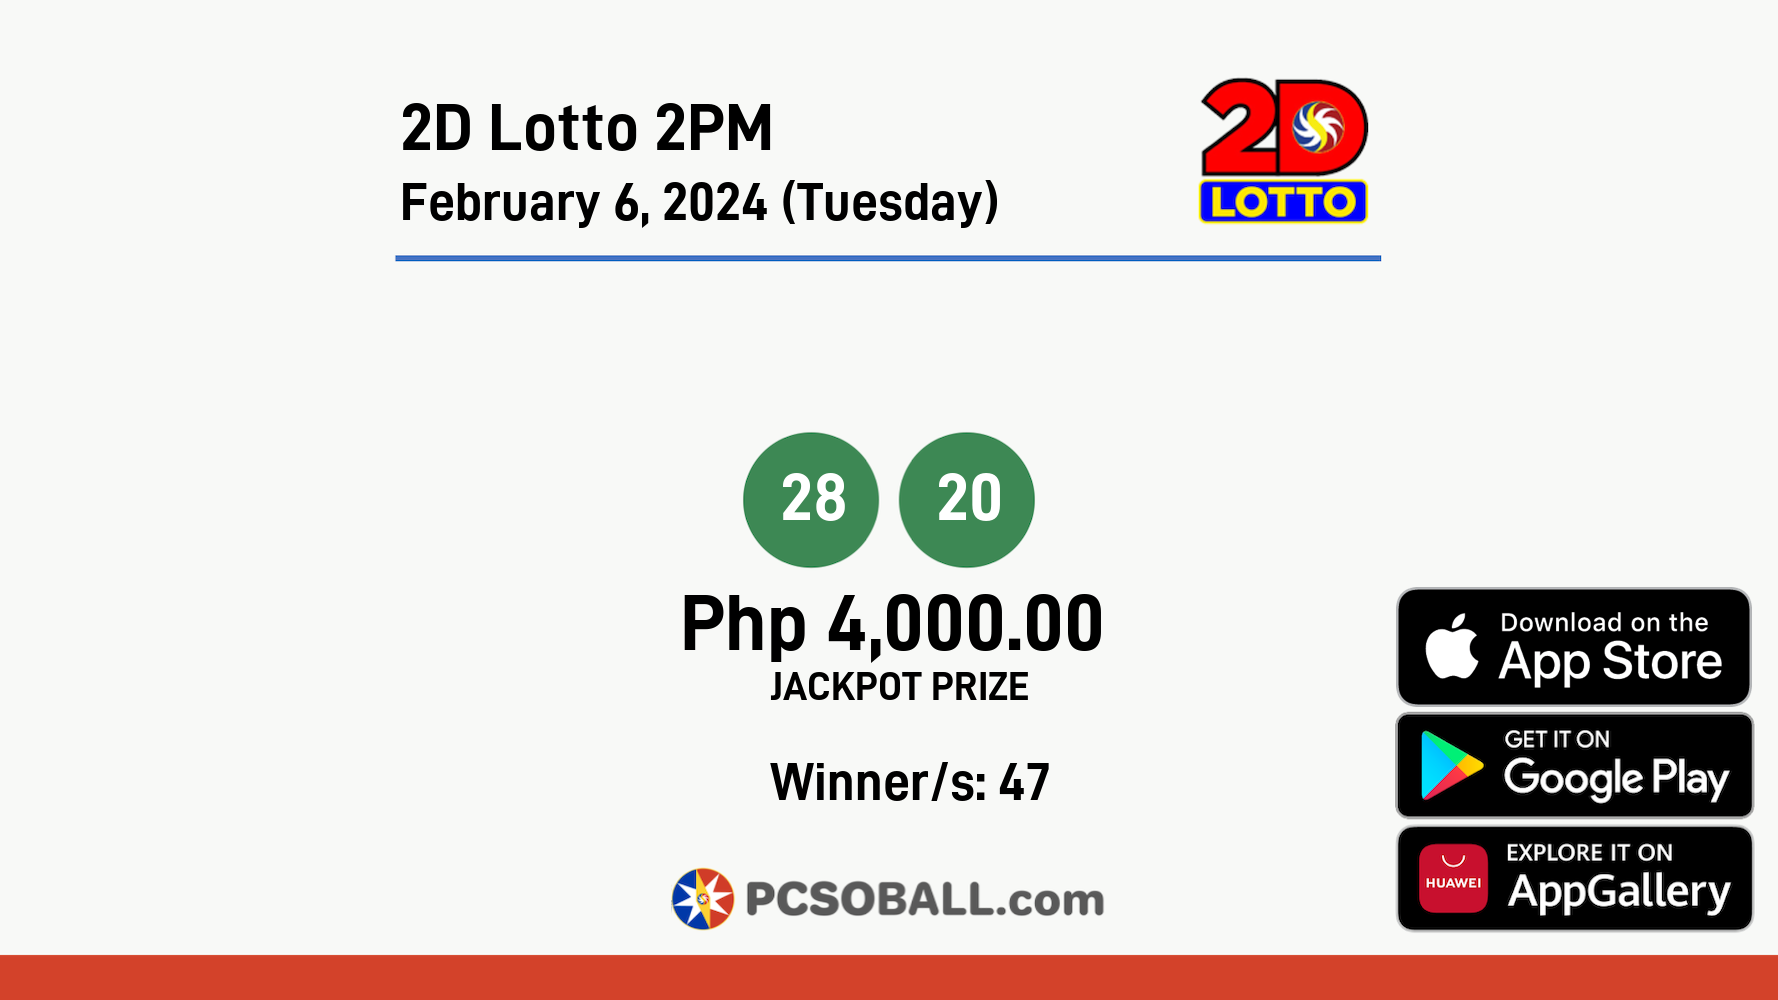 2D Lotto 2PM February 6, 2024 (Tuesday) Result